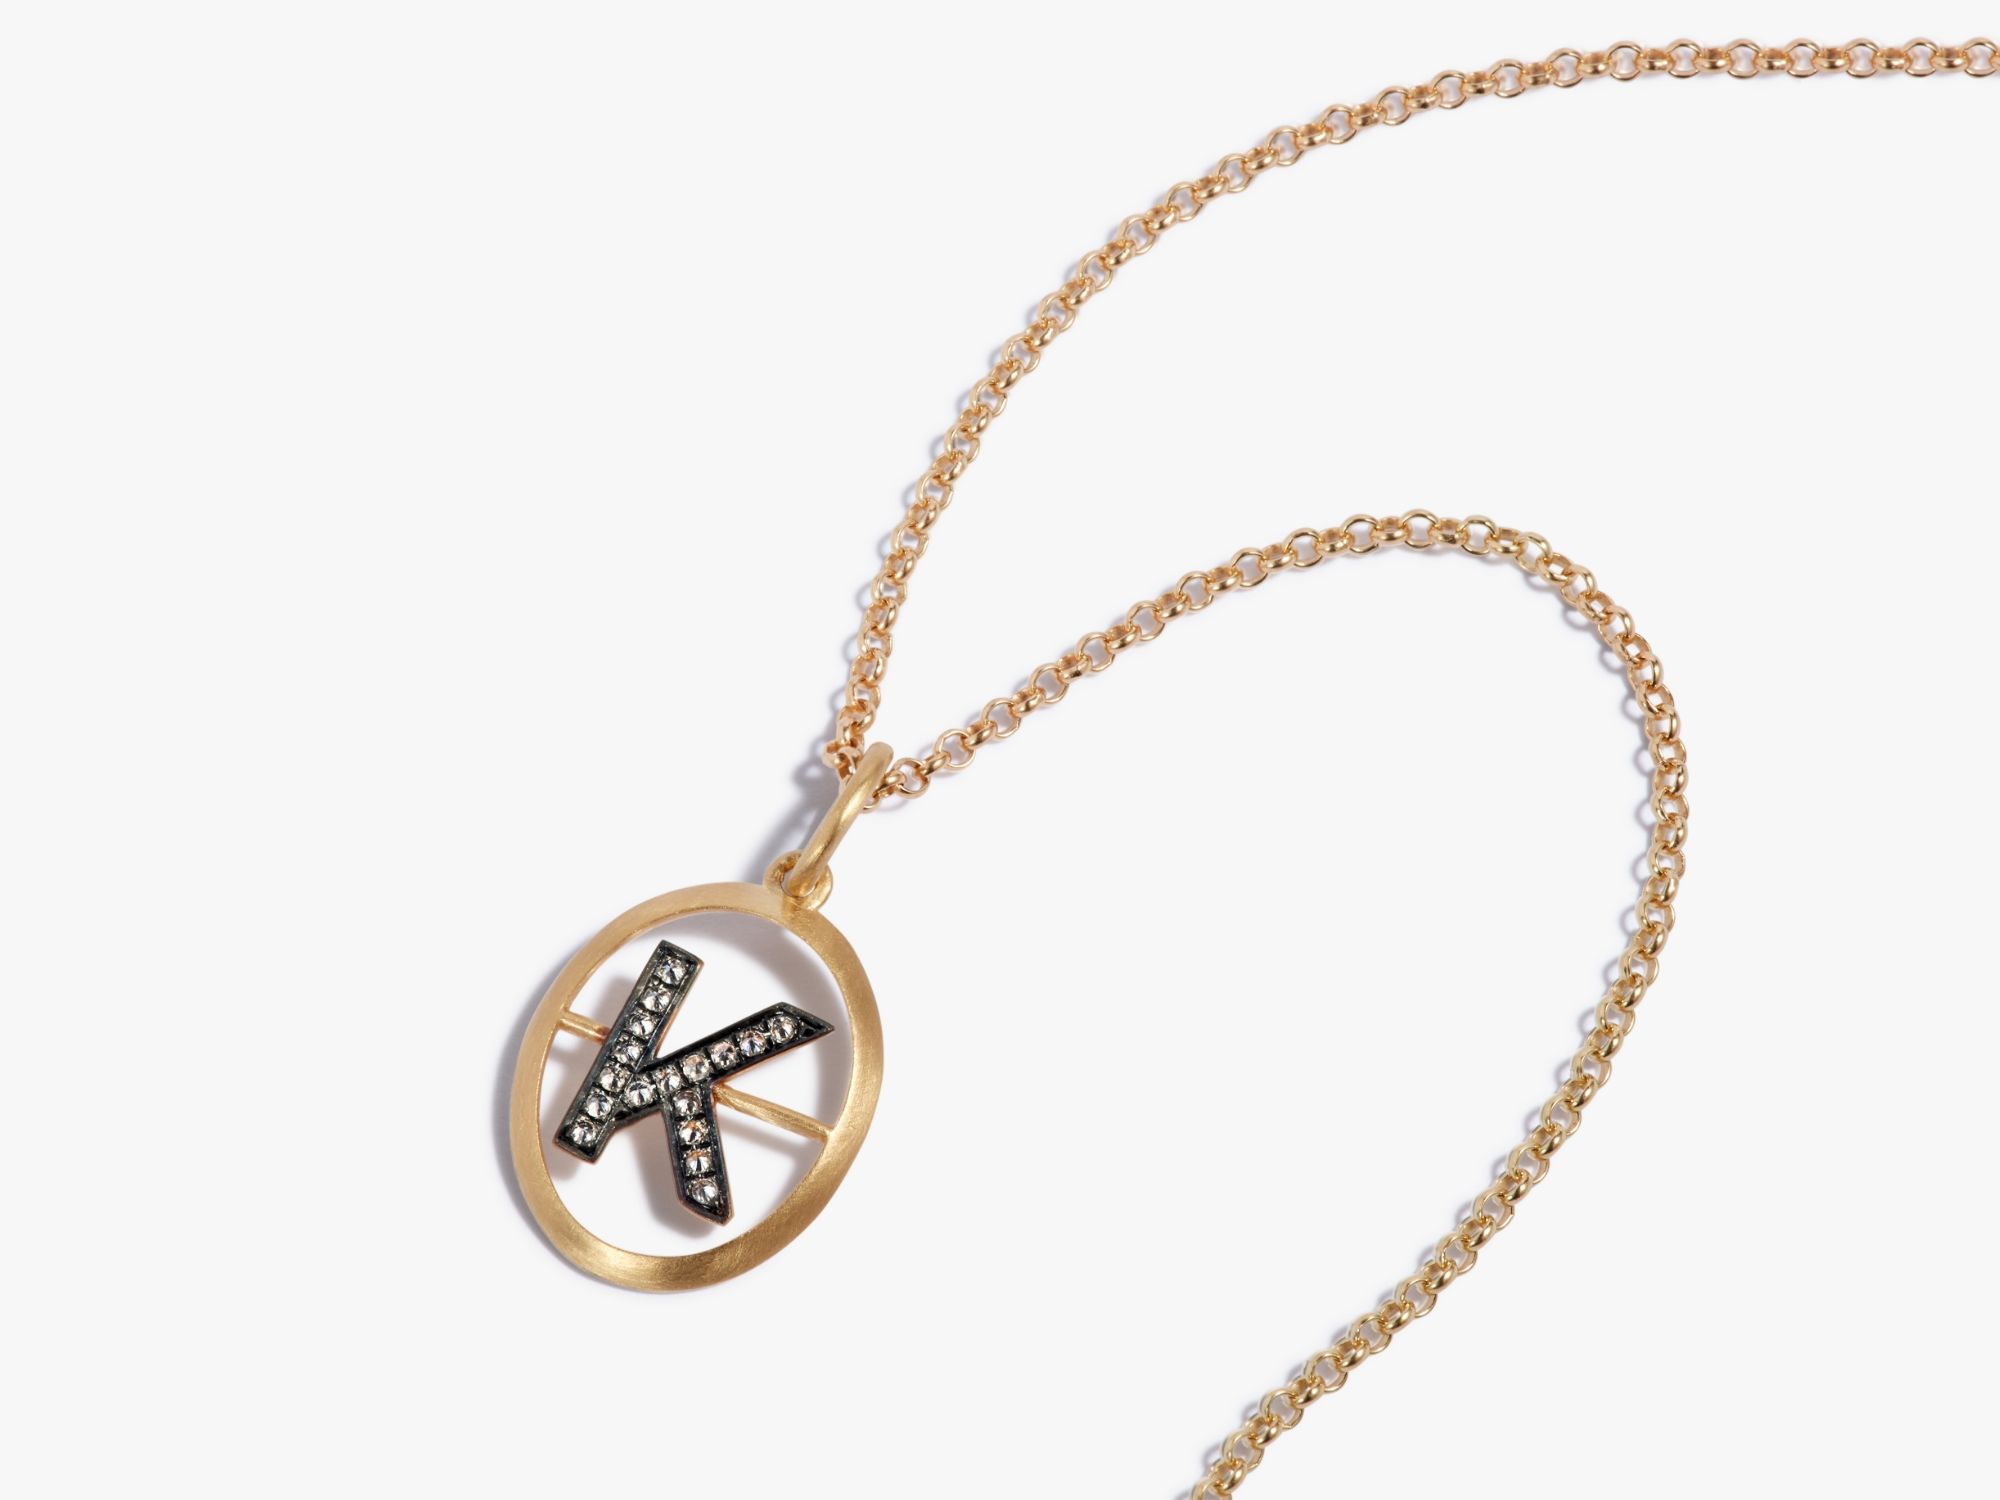 Initial K Necklace